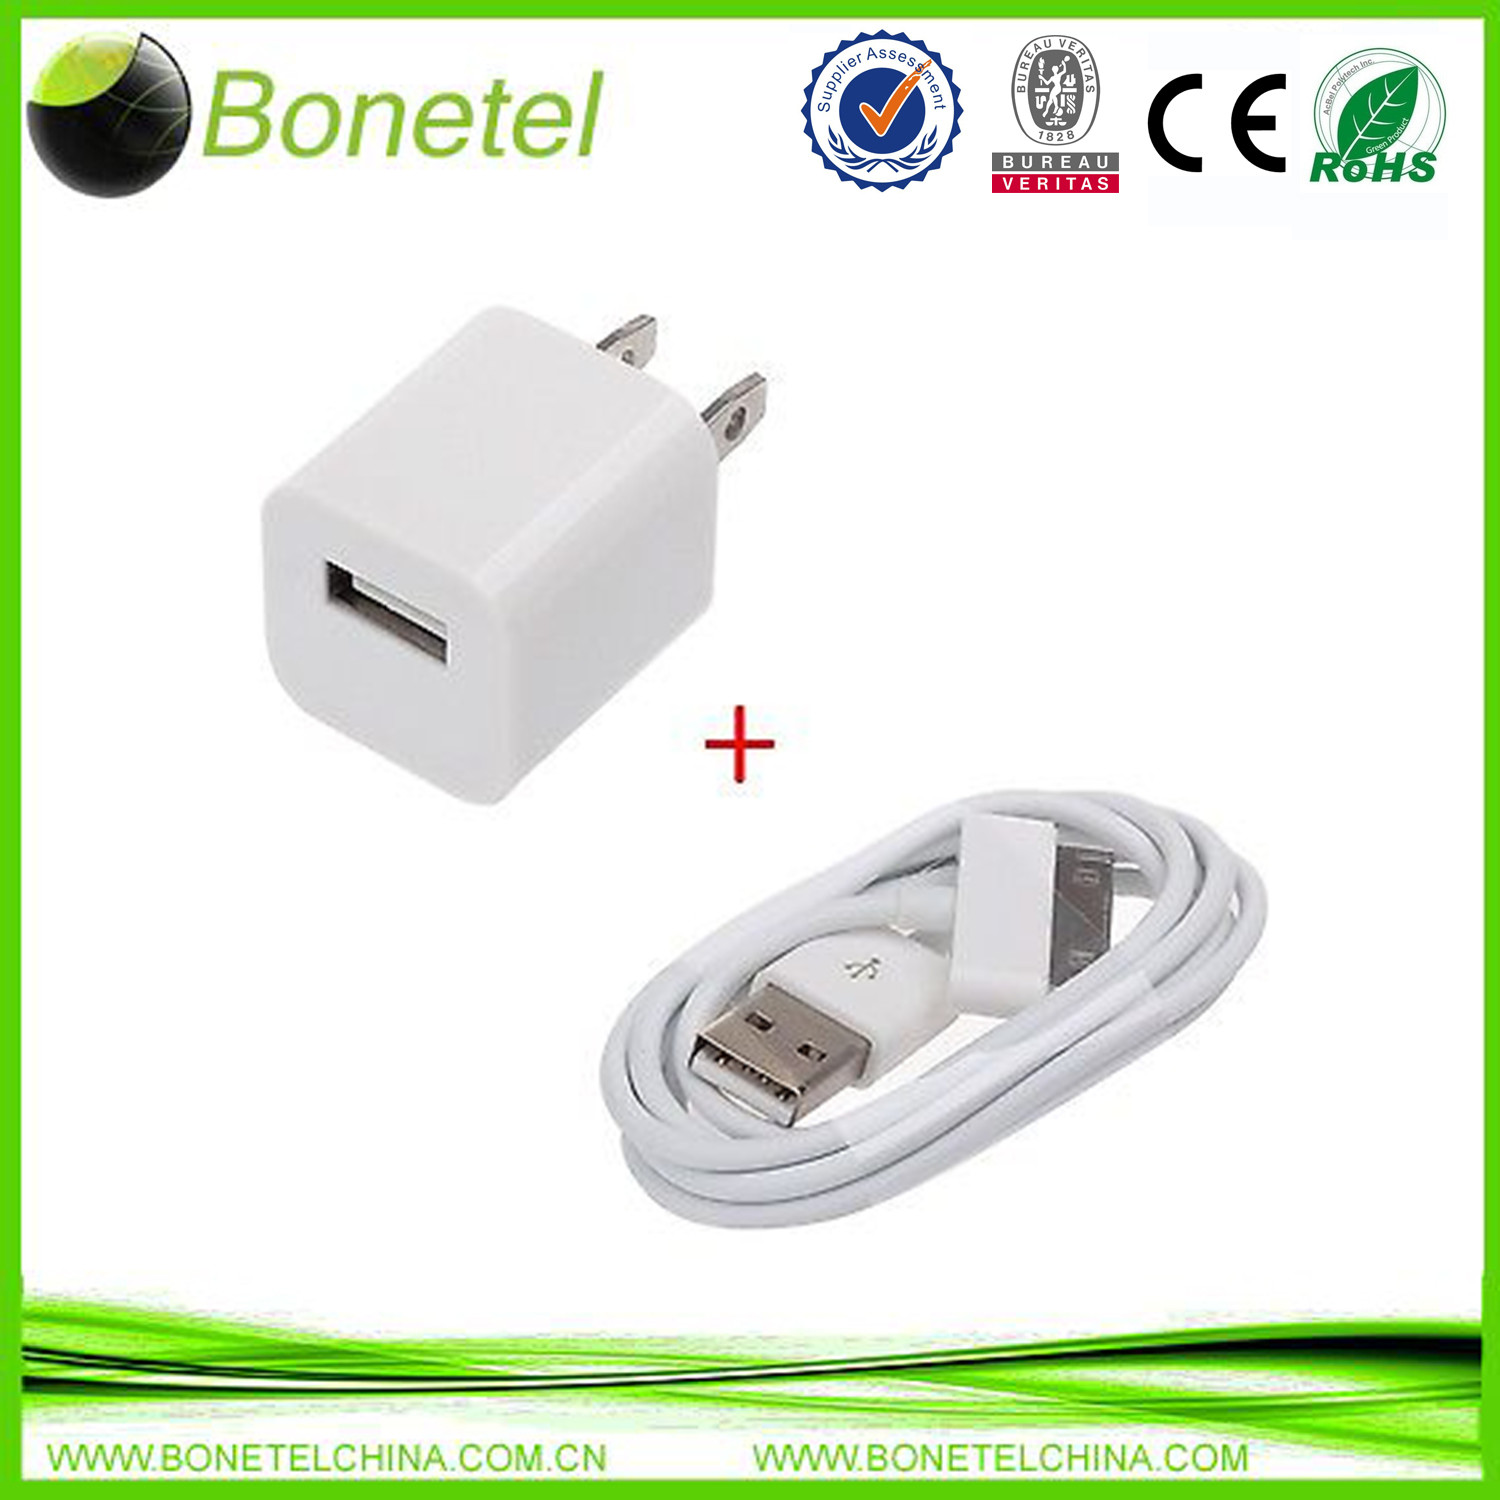 Charger Adapter+ USB Data Sync Cable for iPhone4/4S 3G iPod Touch